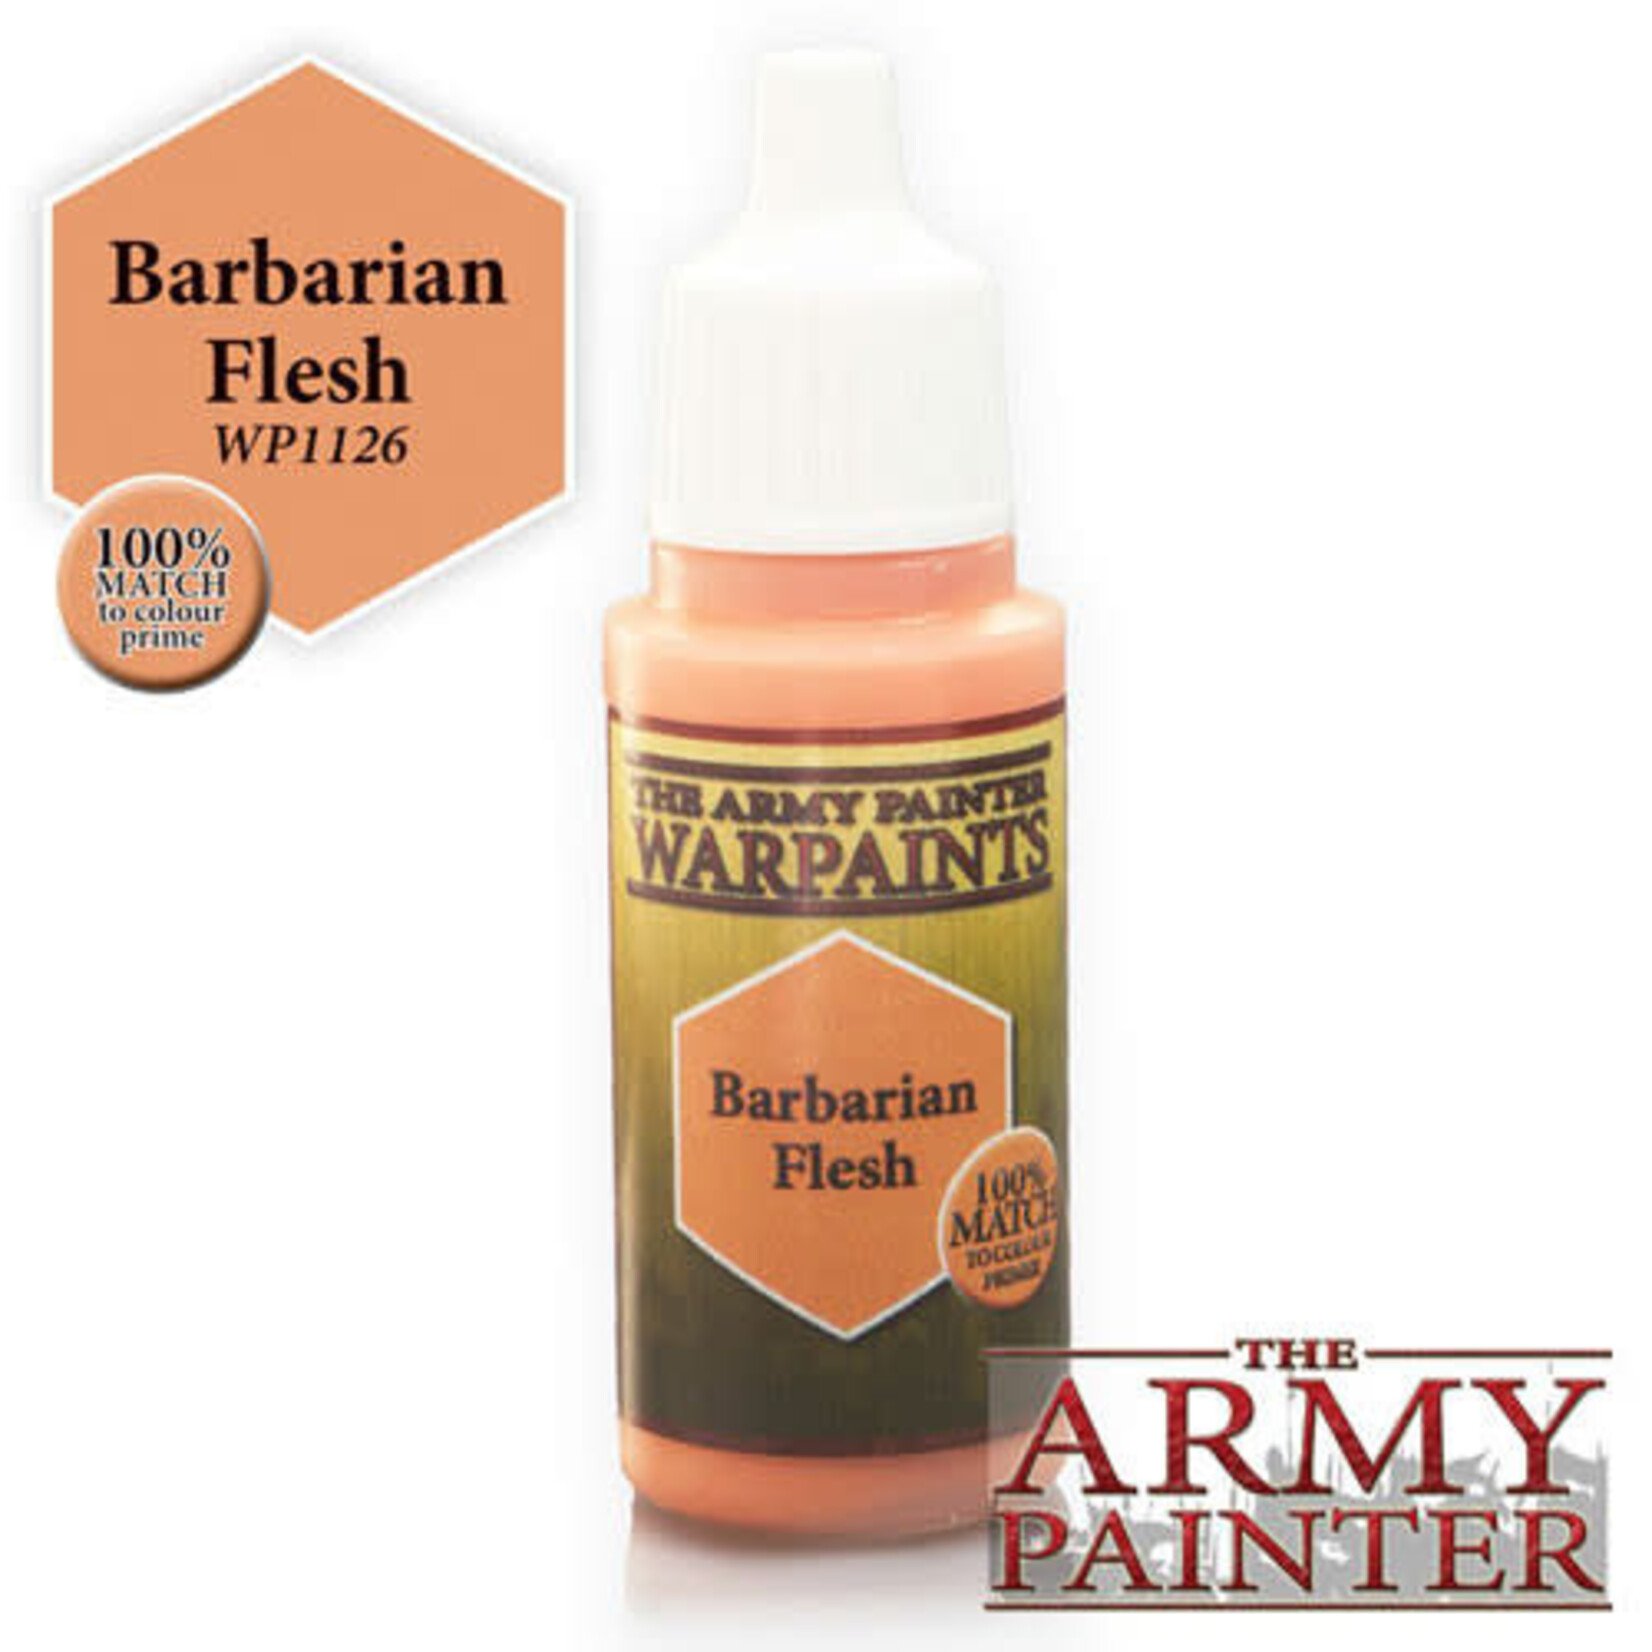 The Army Painter Warpaints: Barbarian Flesh 18ml